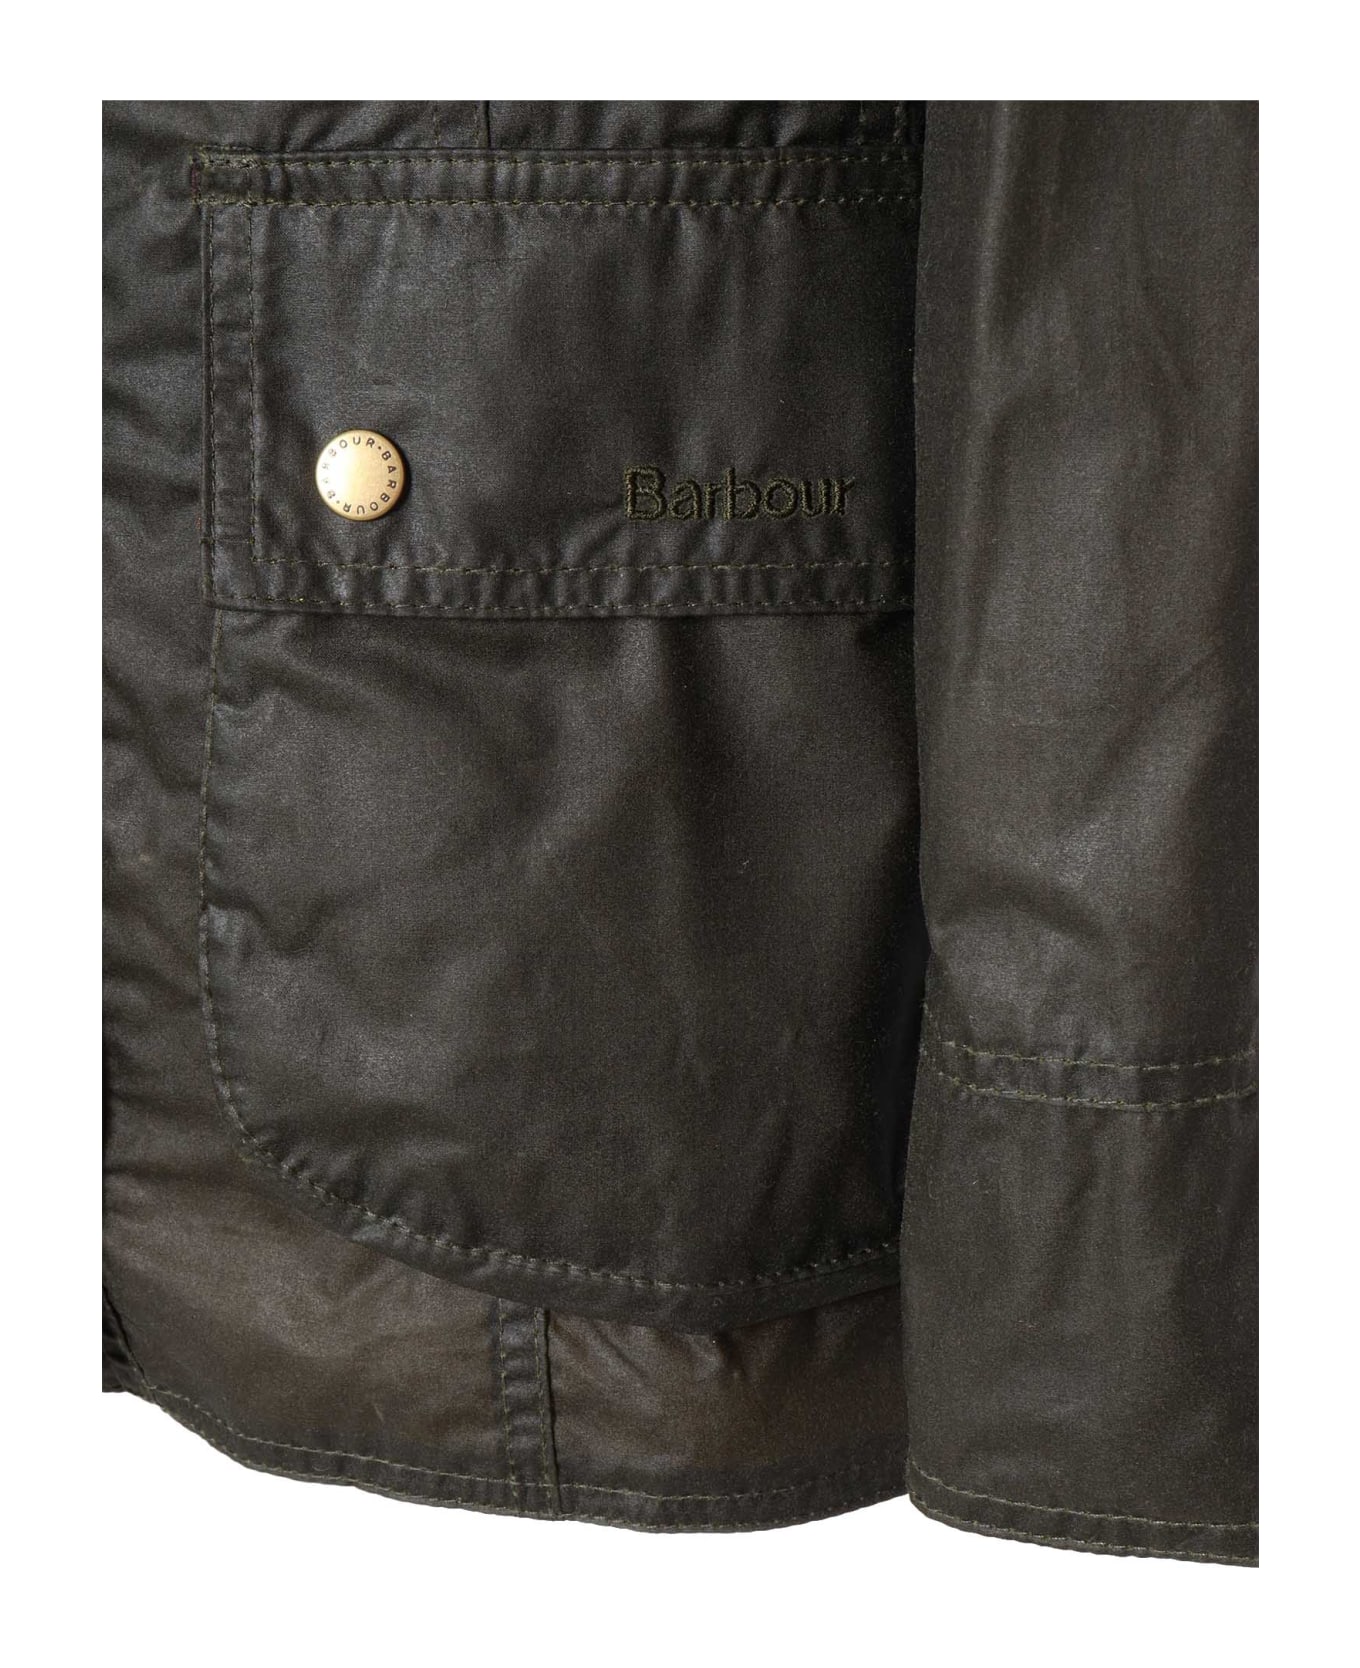 Barbour Beadnell Jacket - BLACK